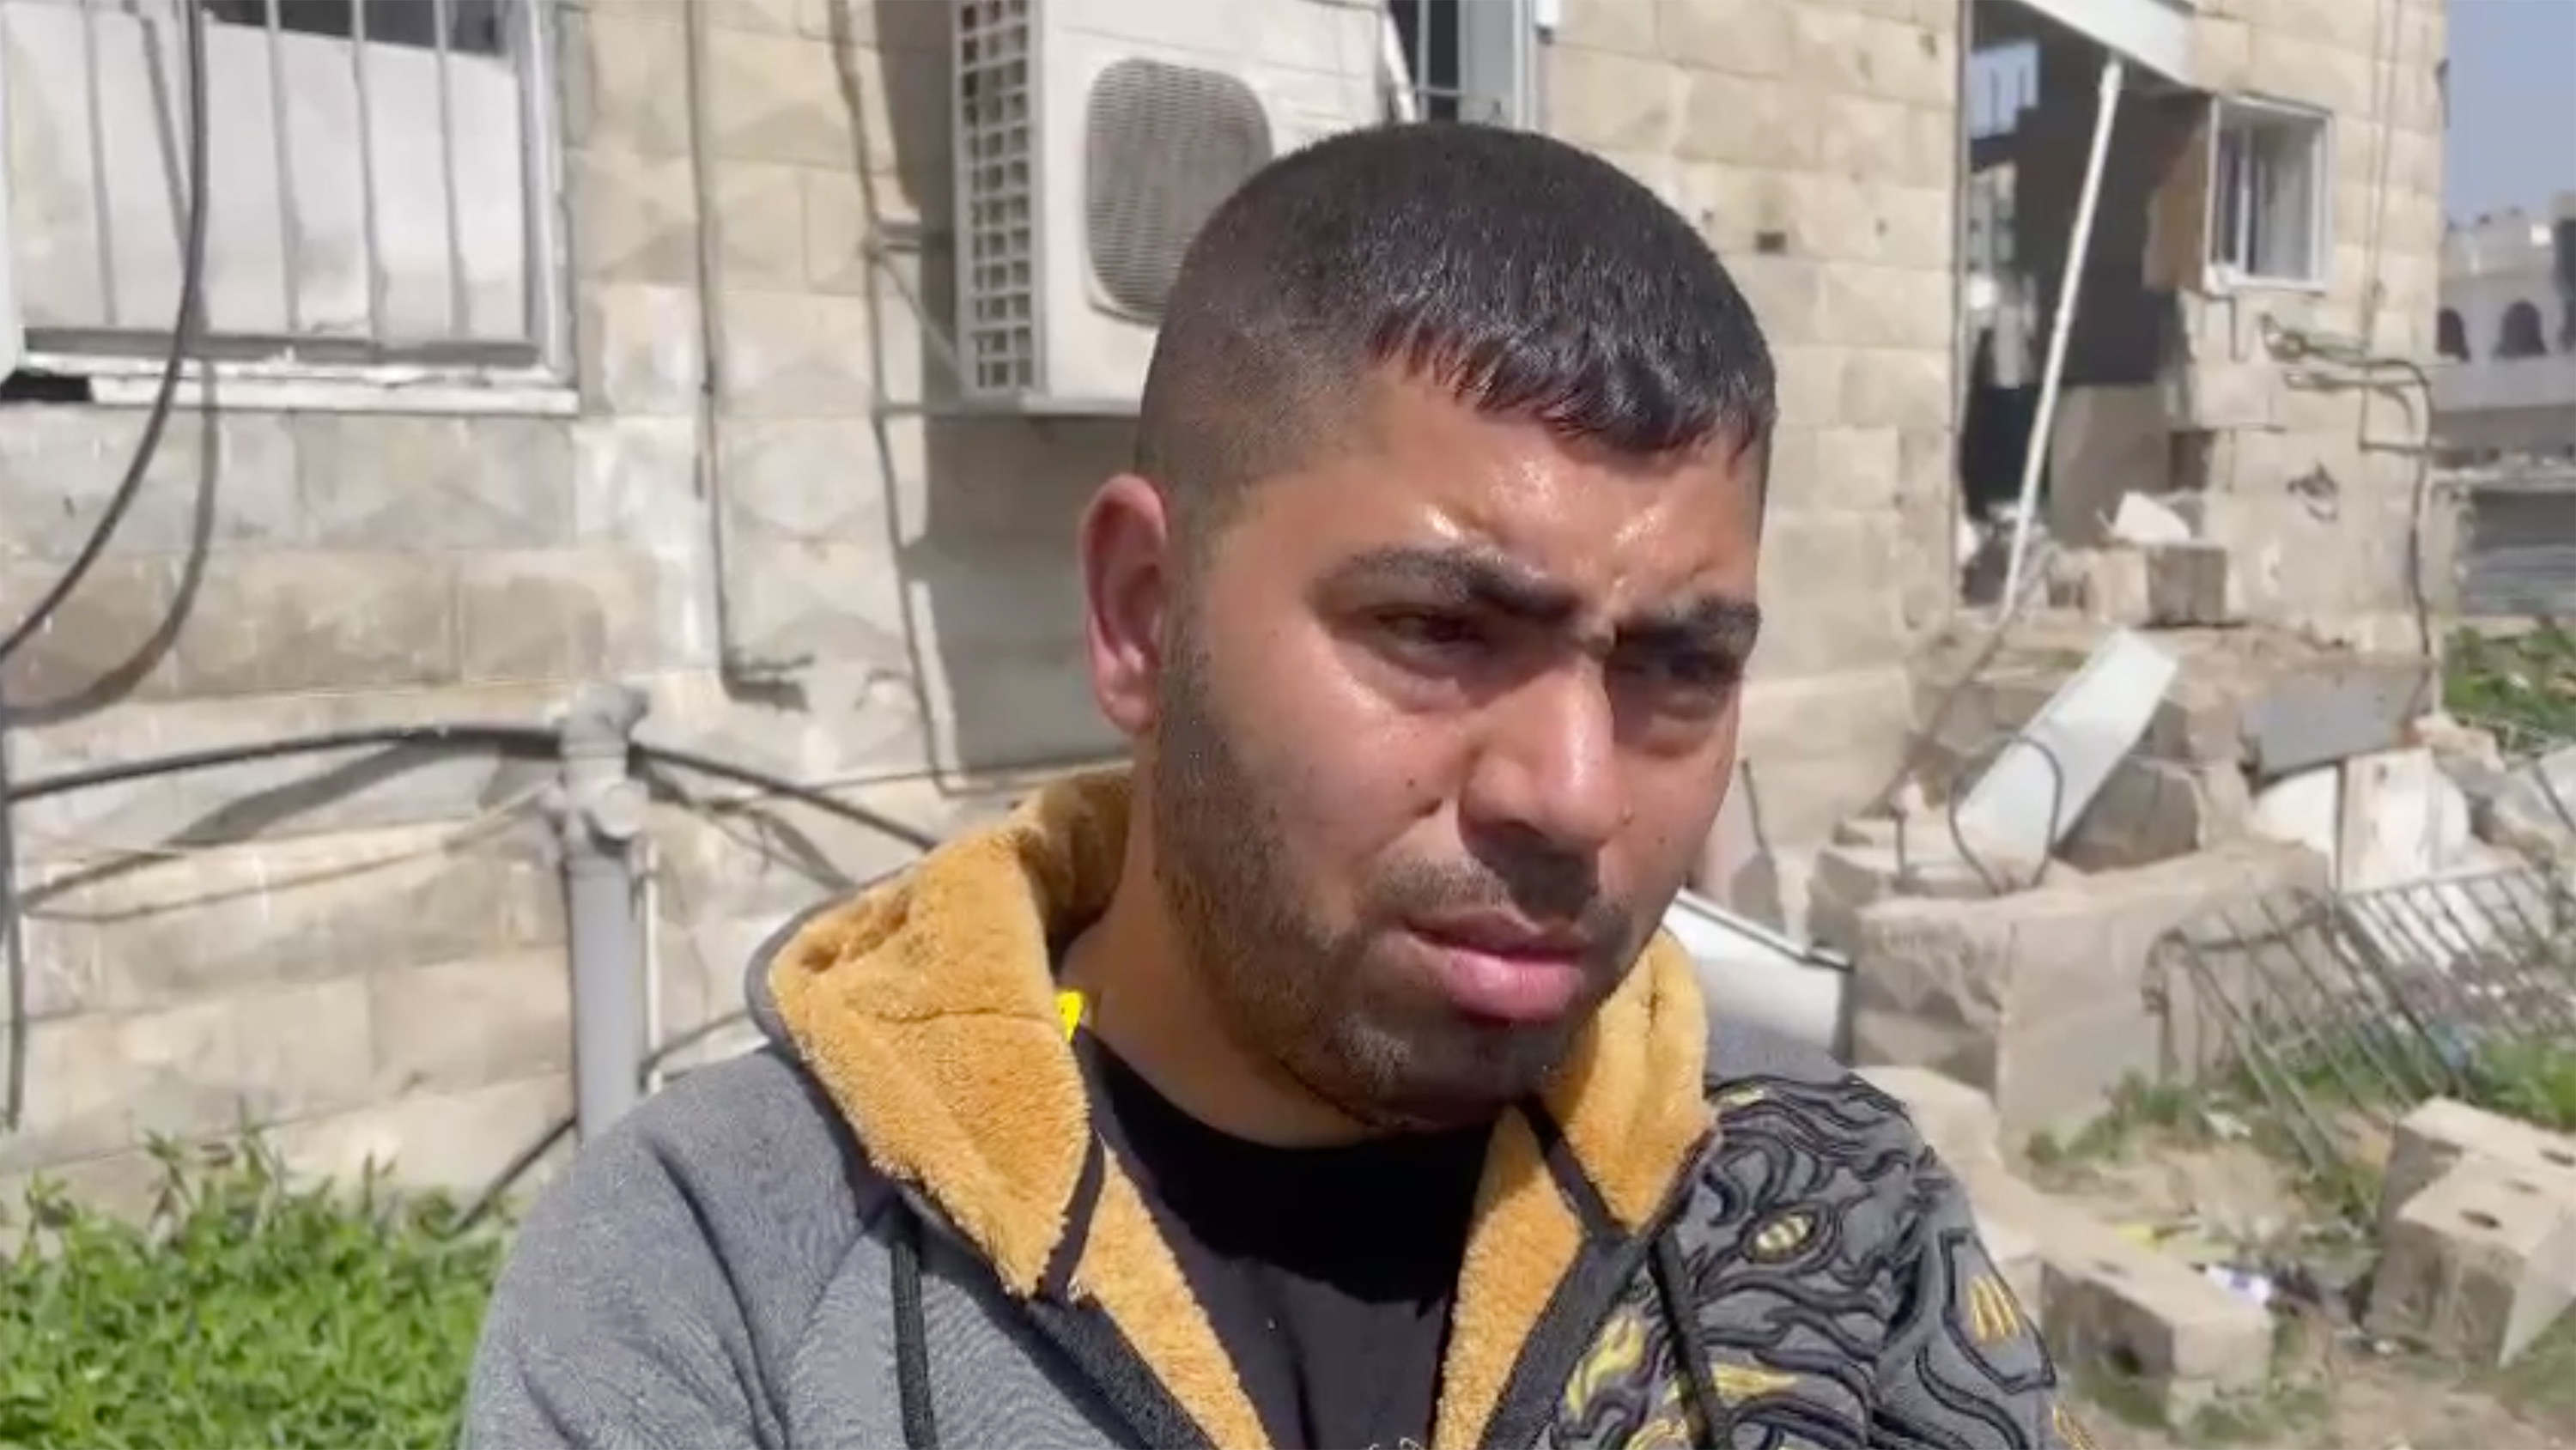 Mohammad Al Shawwa, pictured at Al Ahli Baptist Hospital, east of Gaza City, on March 28, told CNN he was detained by Israeli forces at Al-Shifa Hospital, stripped naked and left outside in the cold.